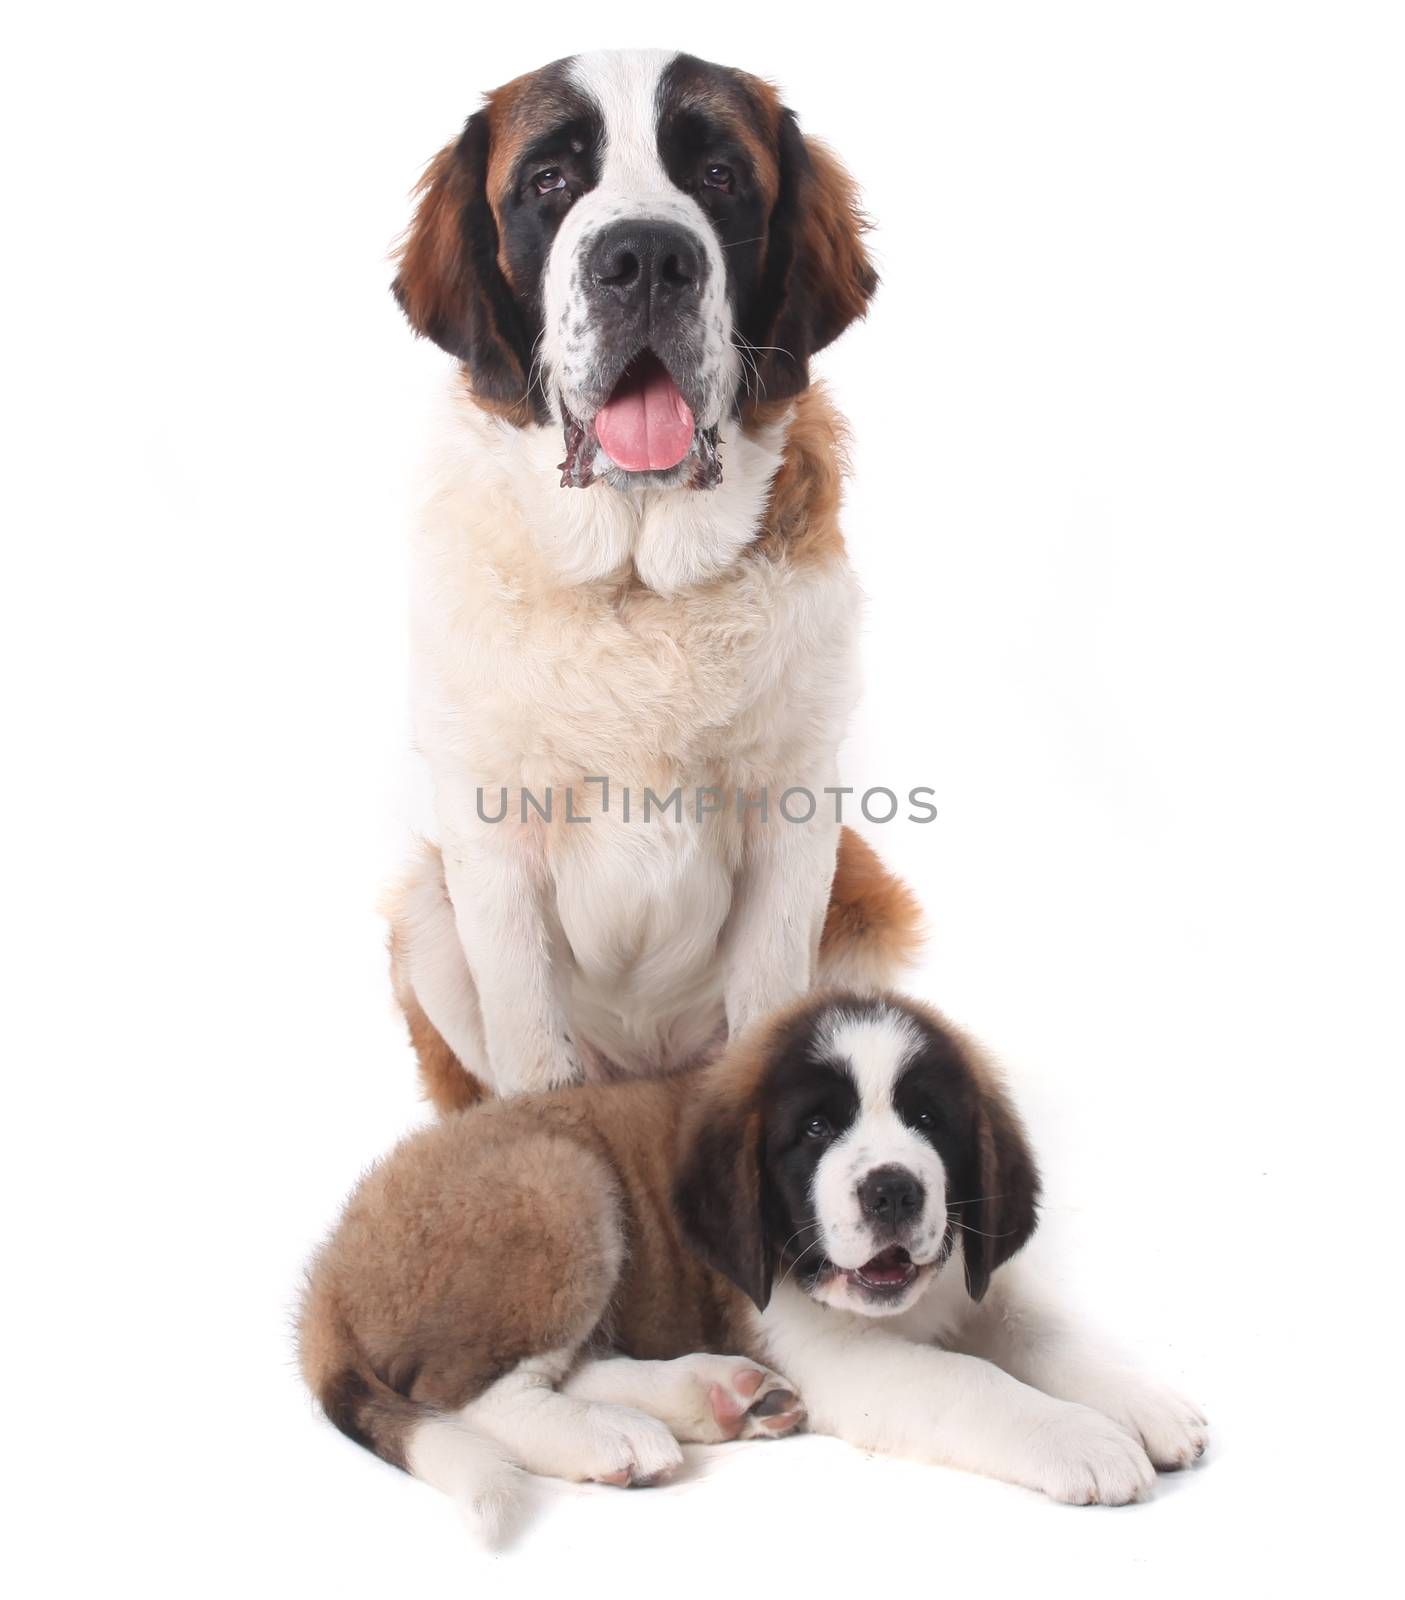 Two Saint Bernard Puppies Together on a White Background